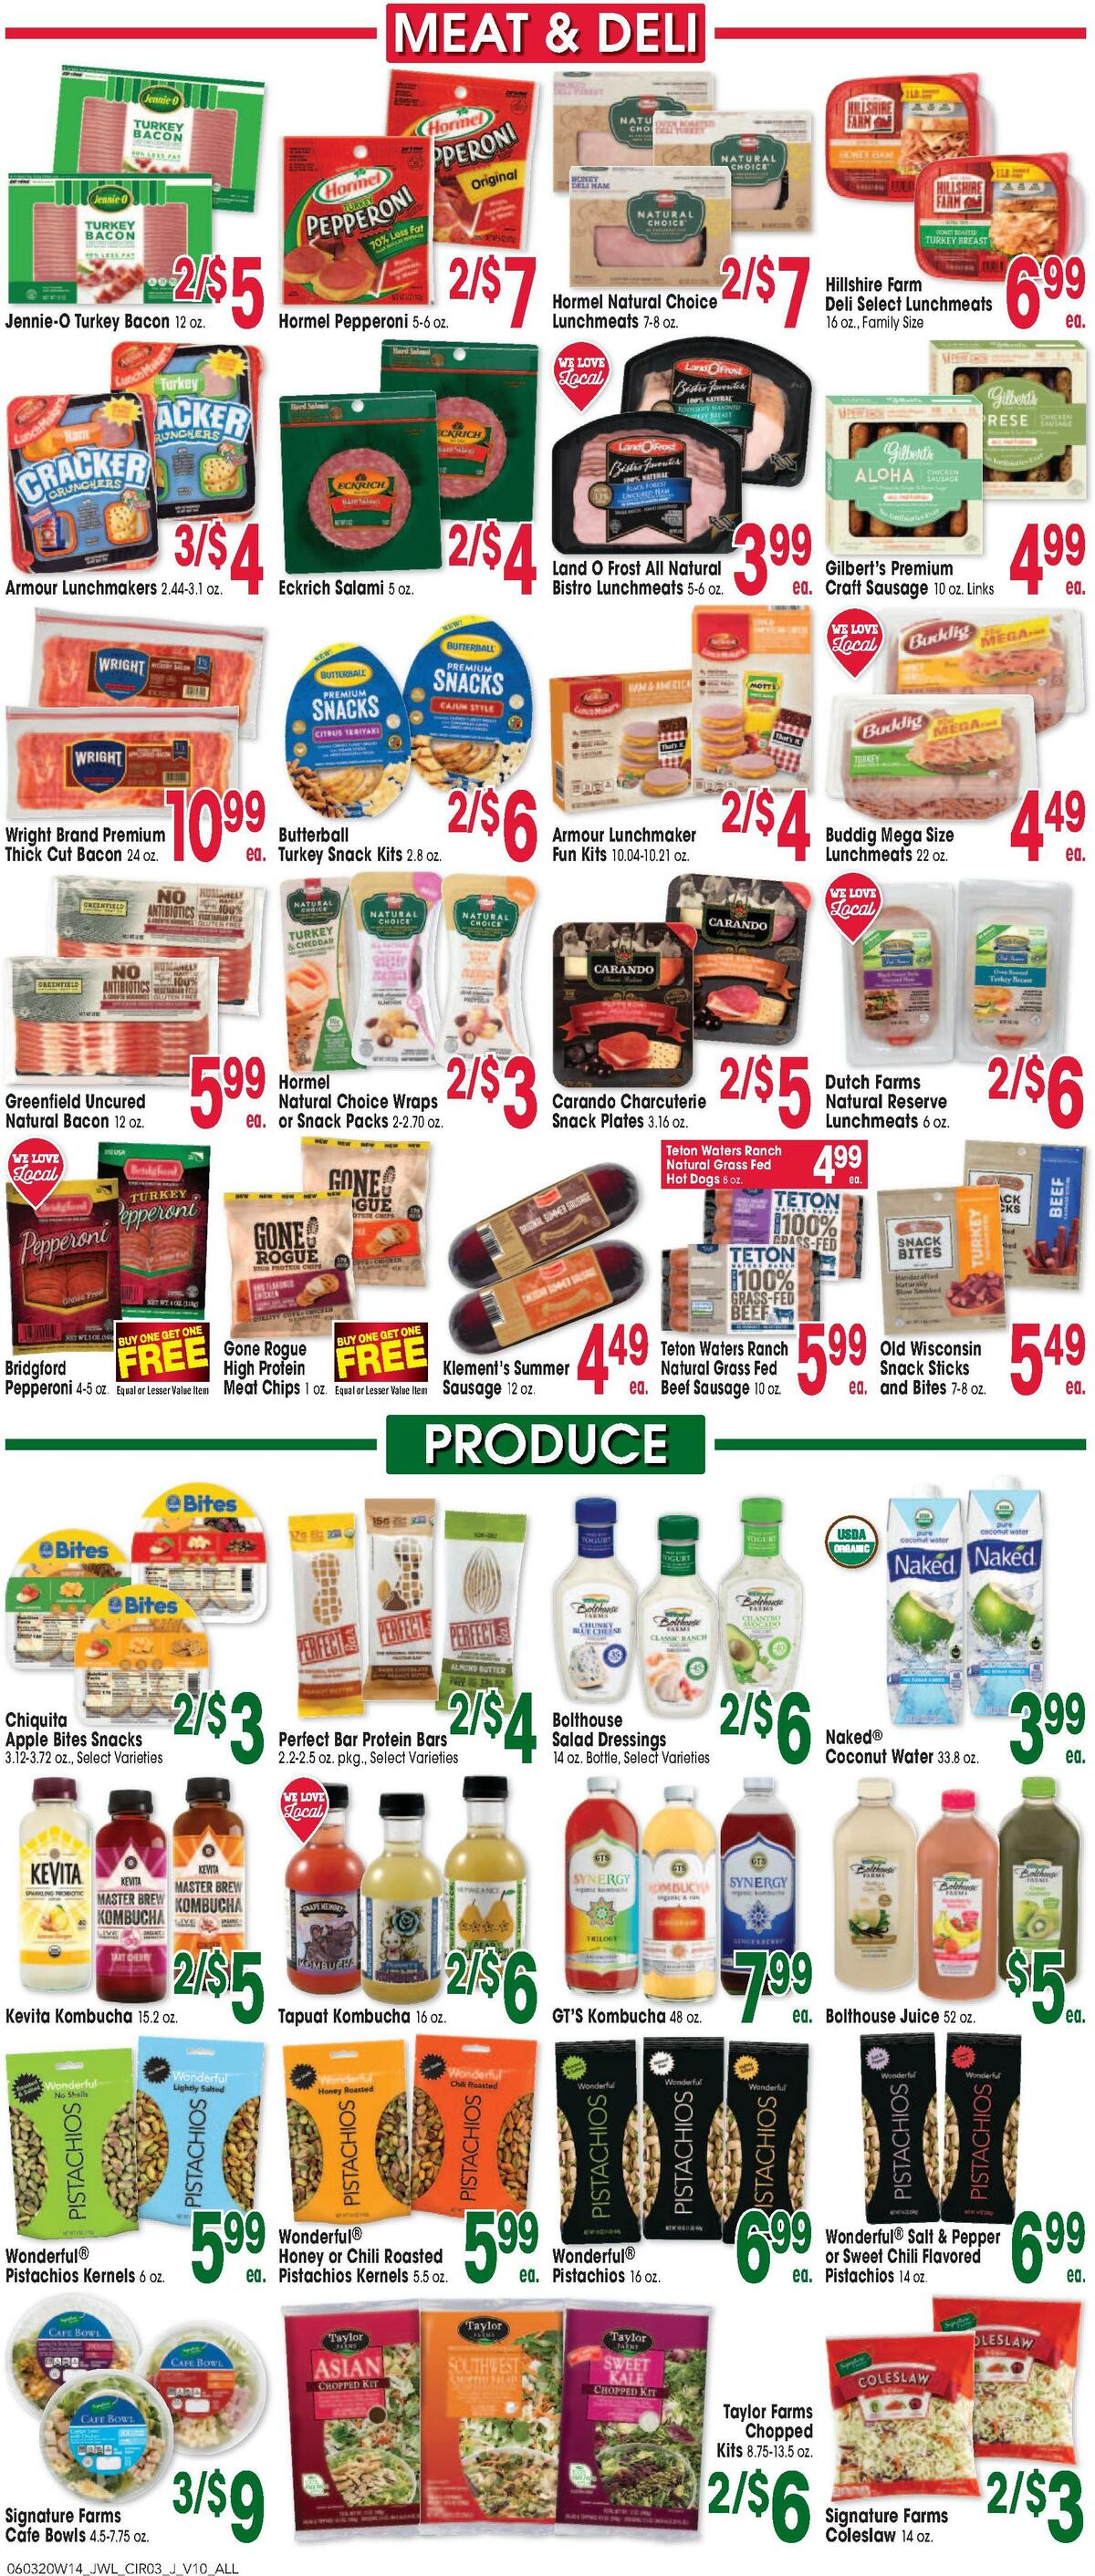 Jewel Osco Weekly Ad from June 3